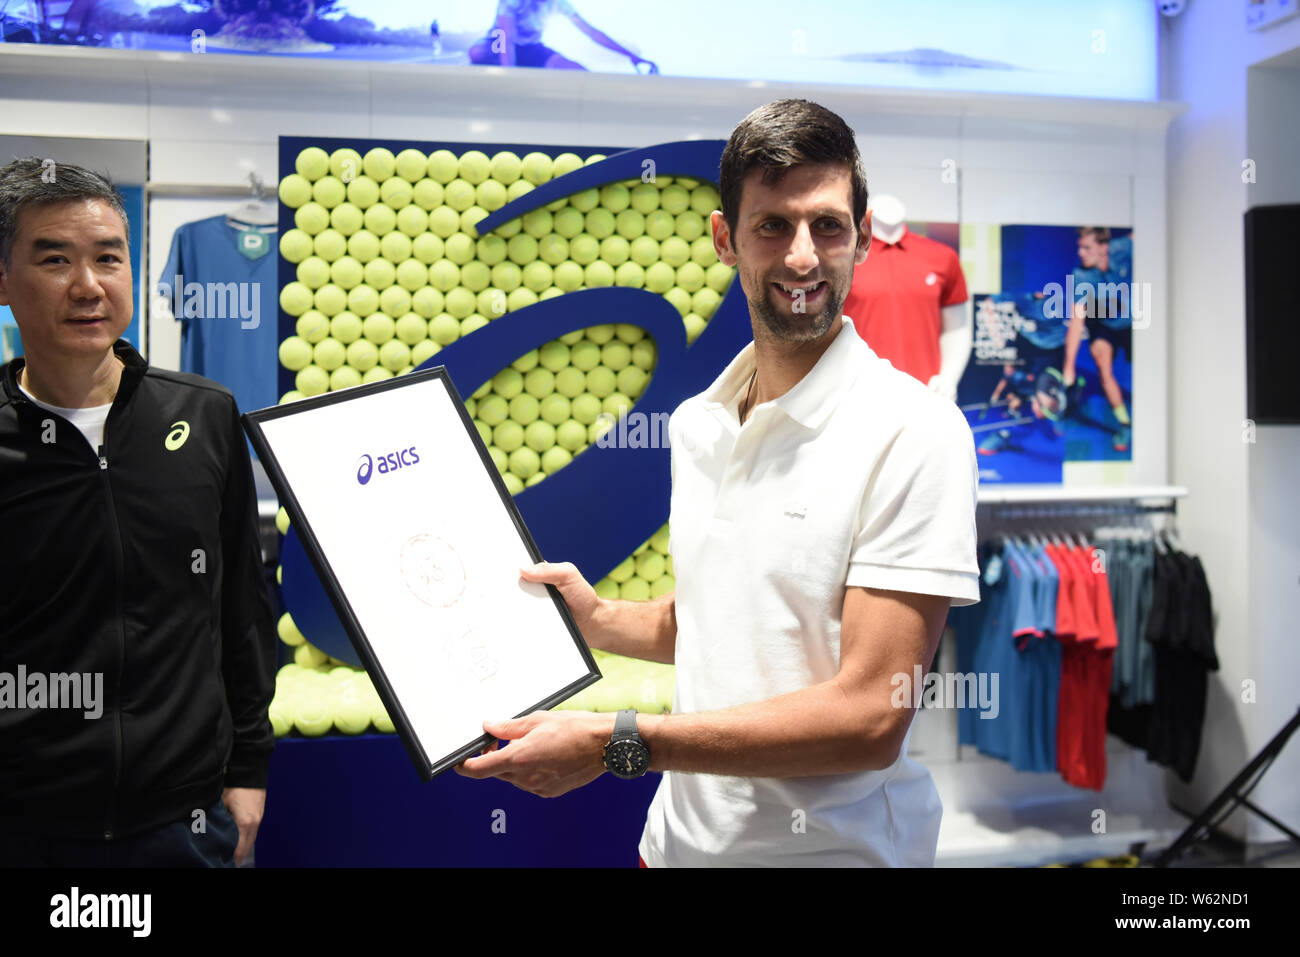 Serbian tennis star Novak Djokovic attends a promotional event for Asics  ahead of the Rolex Shanghai Masters 2018 tennis tournament in Shanghai,  China Stock Photo - Alamy